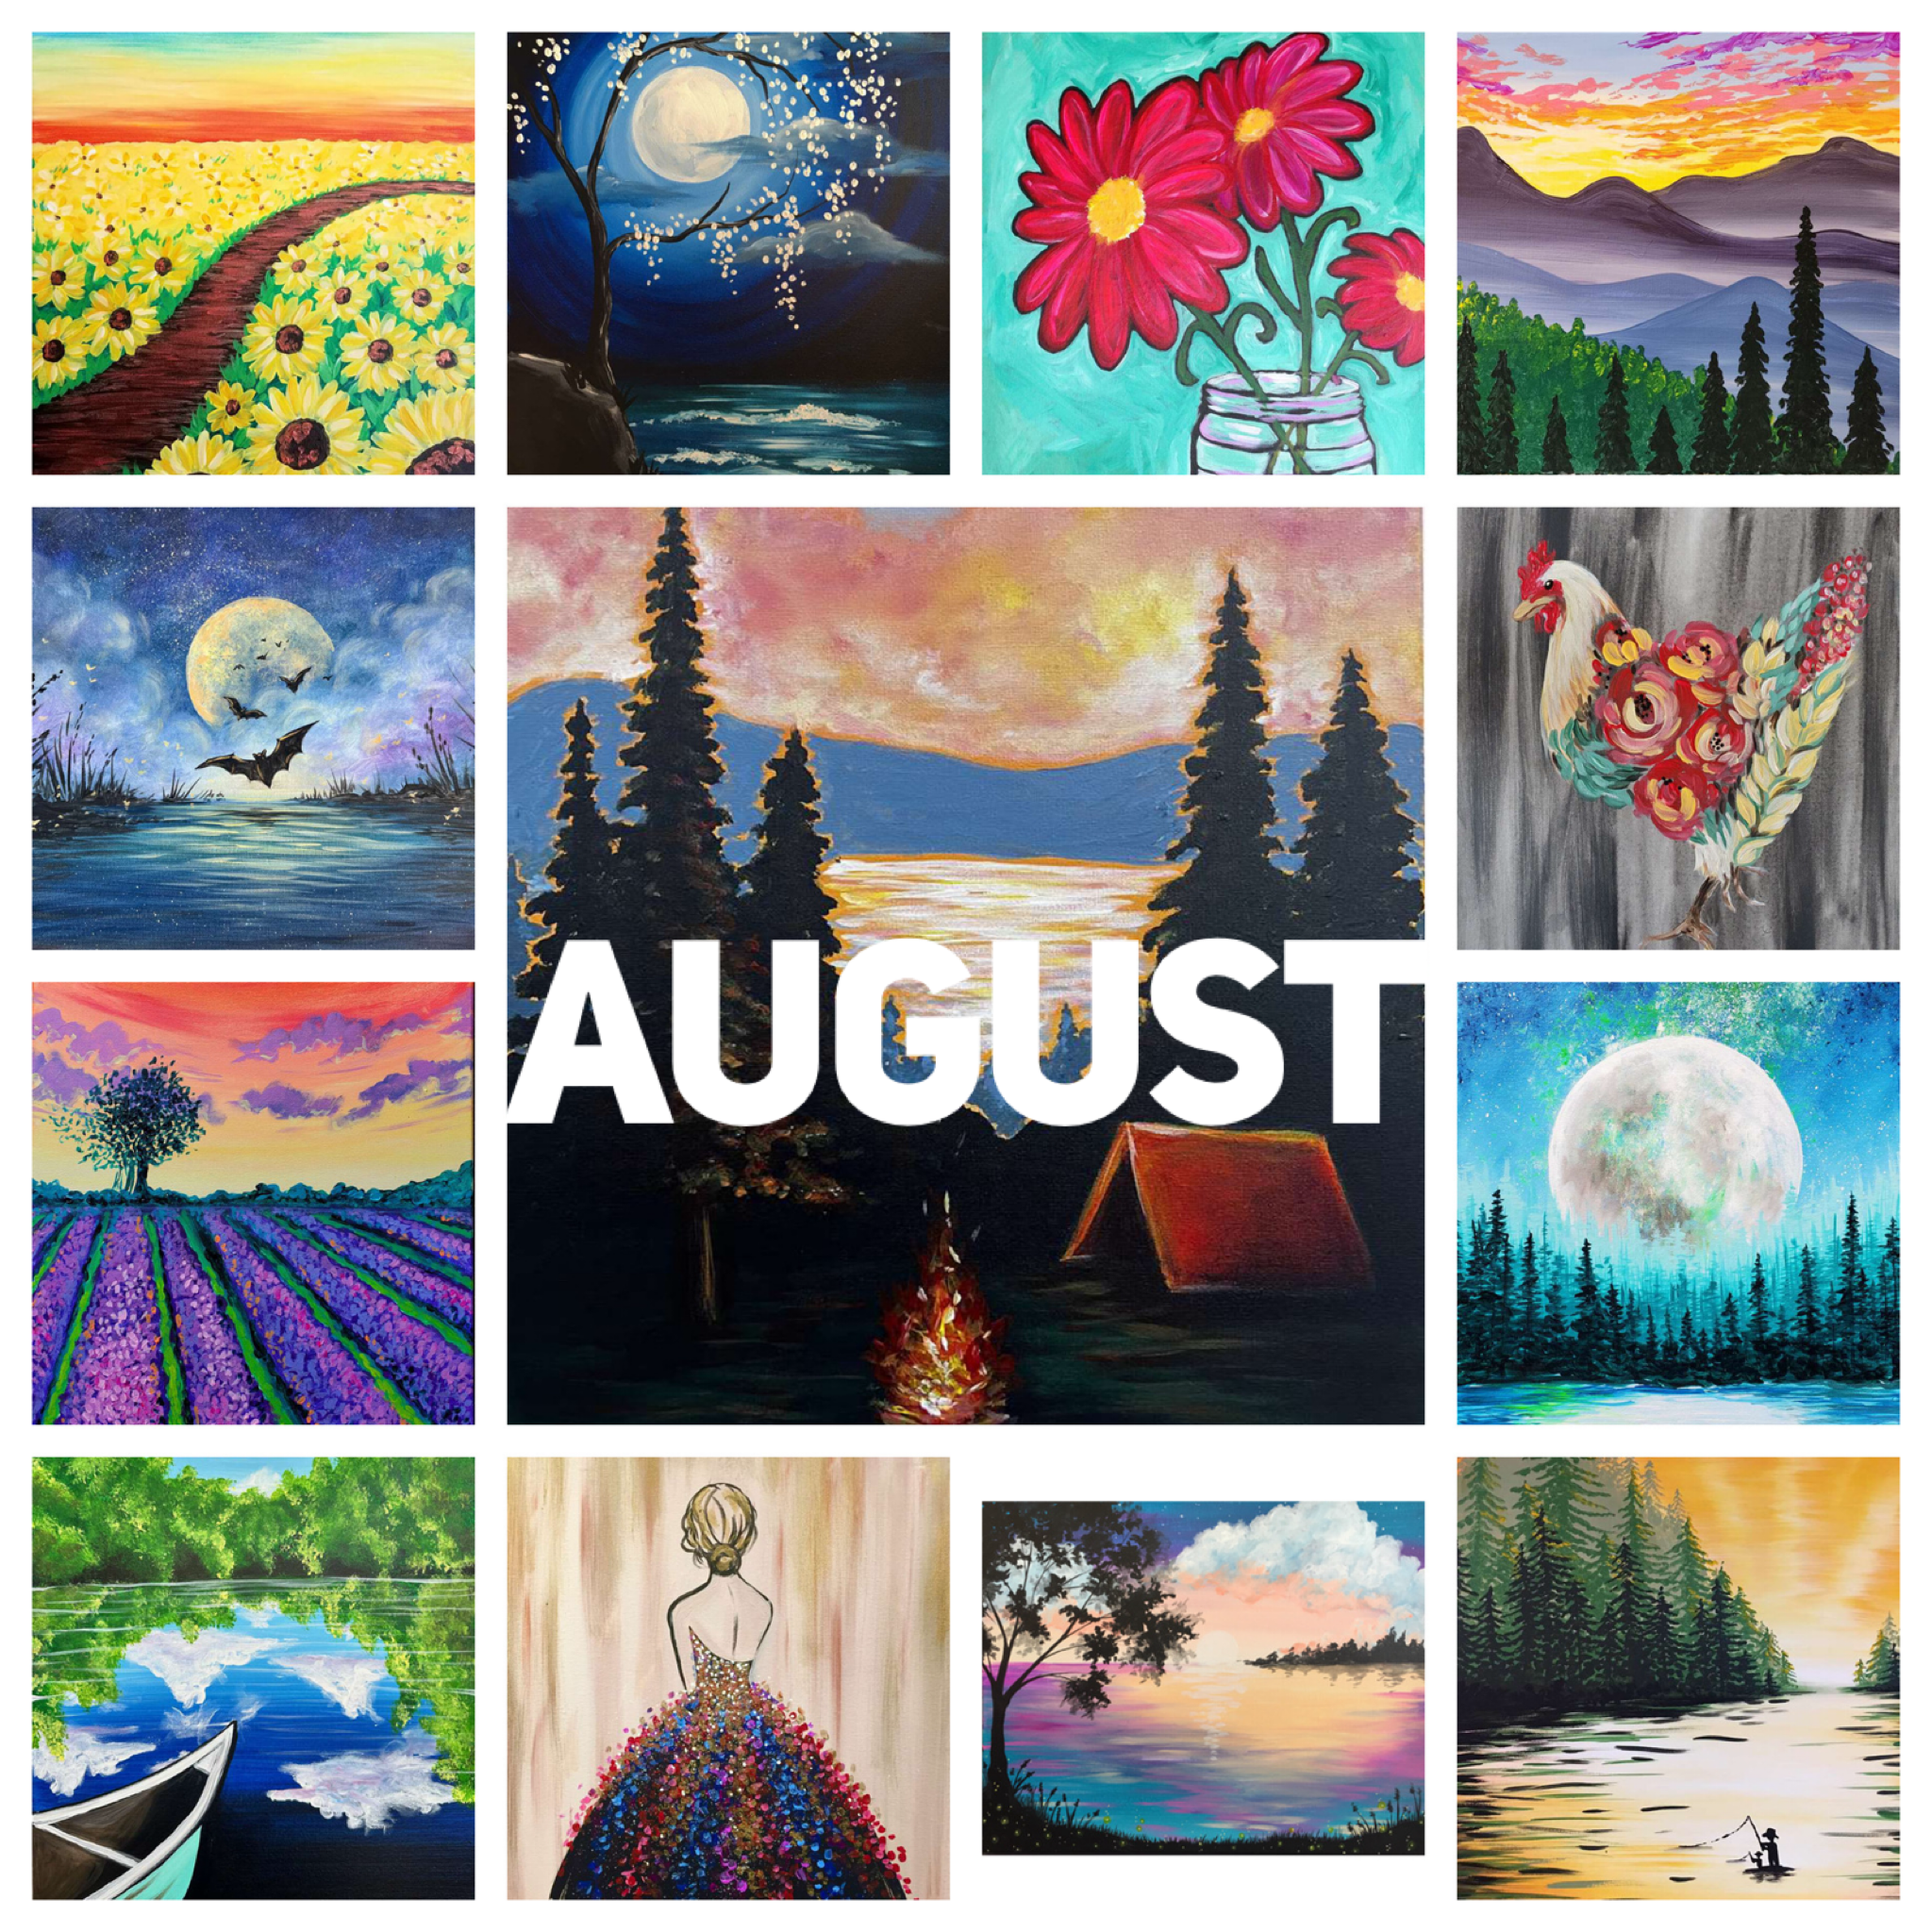 Sip, Paint, and Relax: Join August Classes at Pinot's Palette Cincinnati!